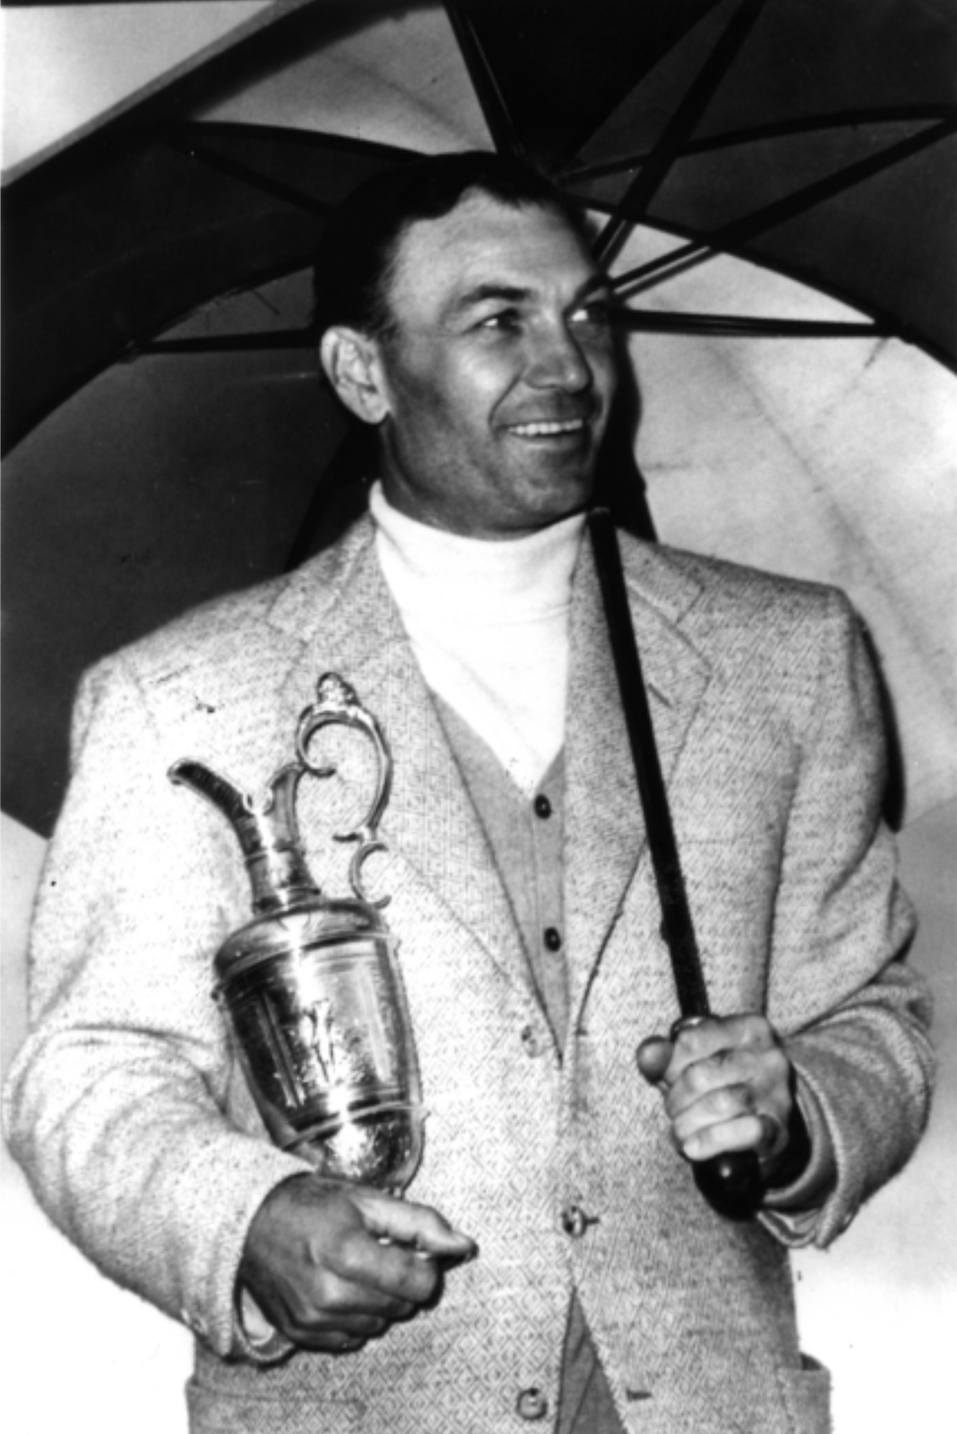 Ben Hogan of the USA with the Claret Jug after victory in the British Open